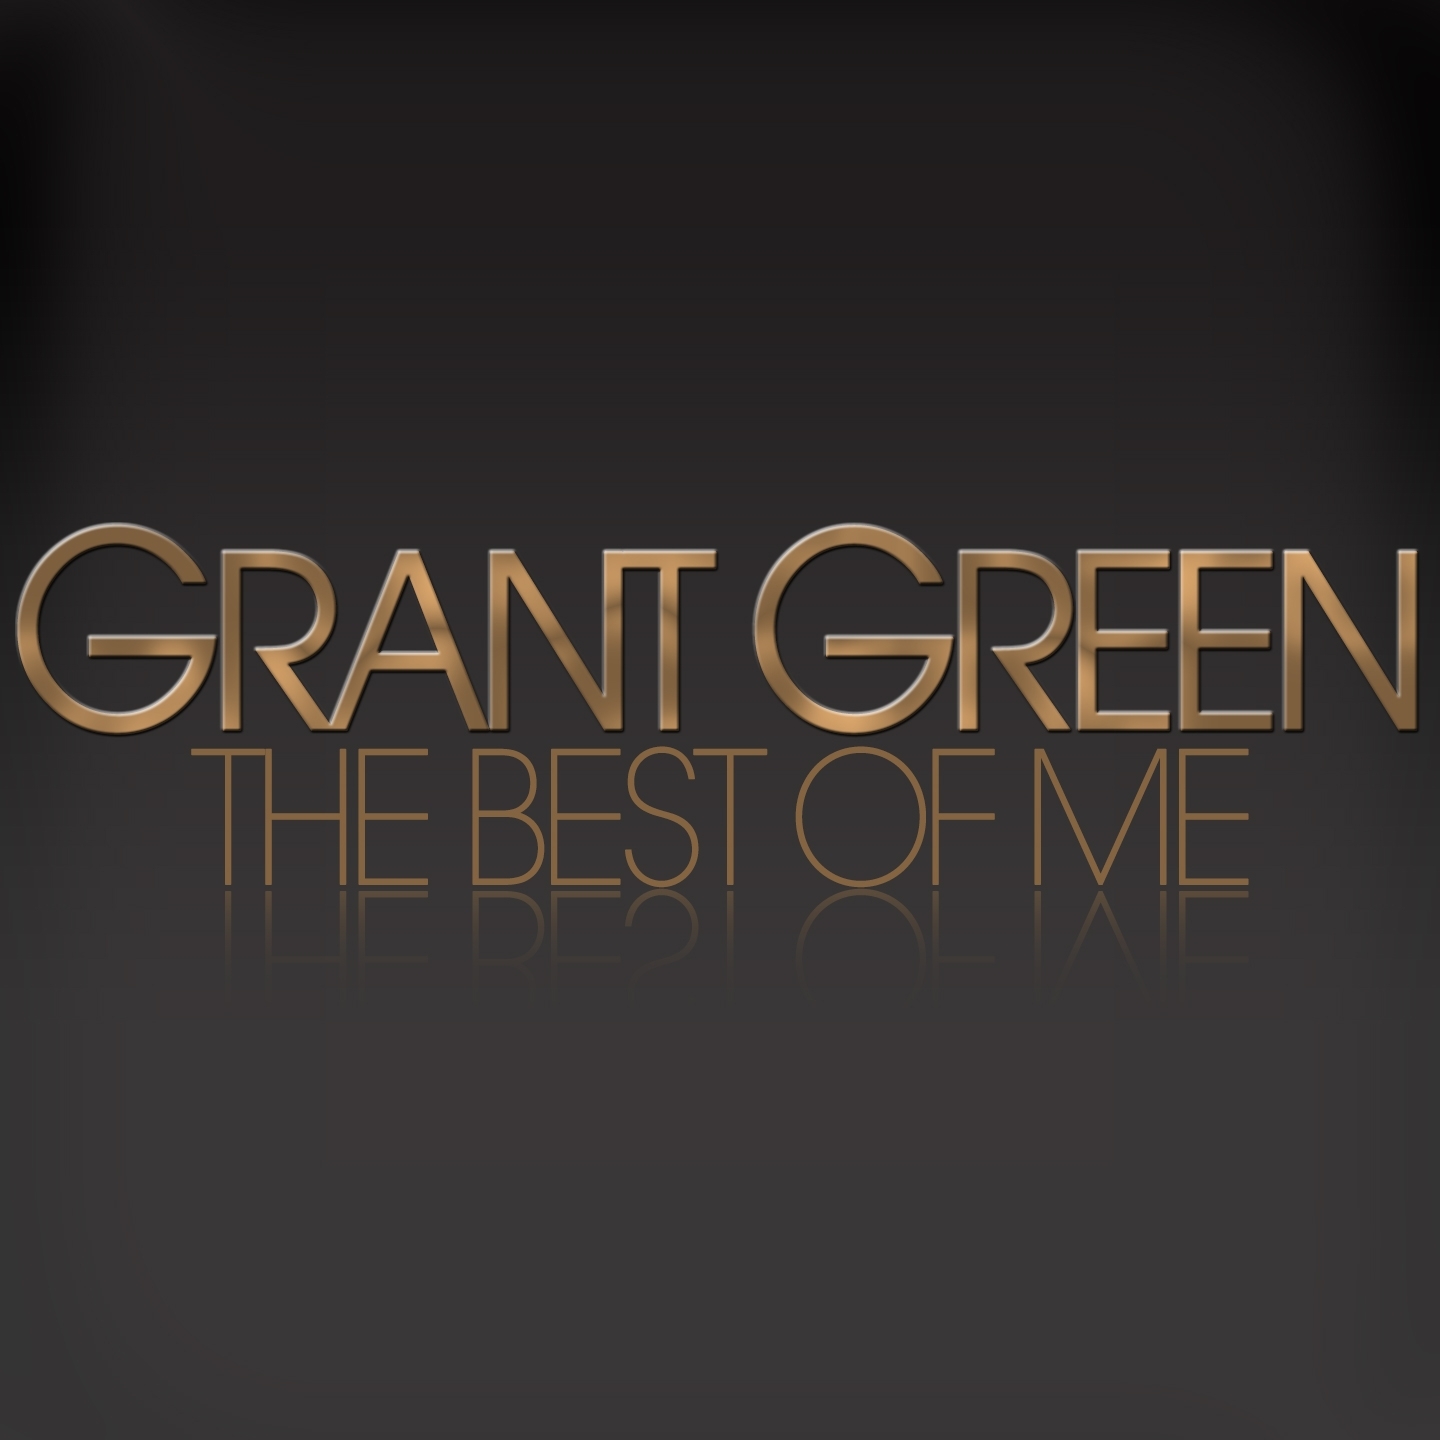 The Best of Me - Grant Green